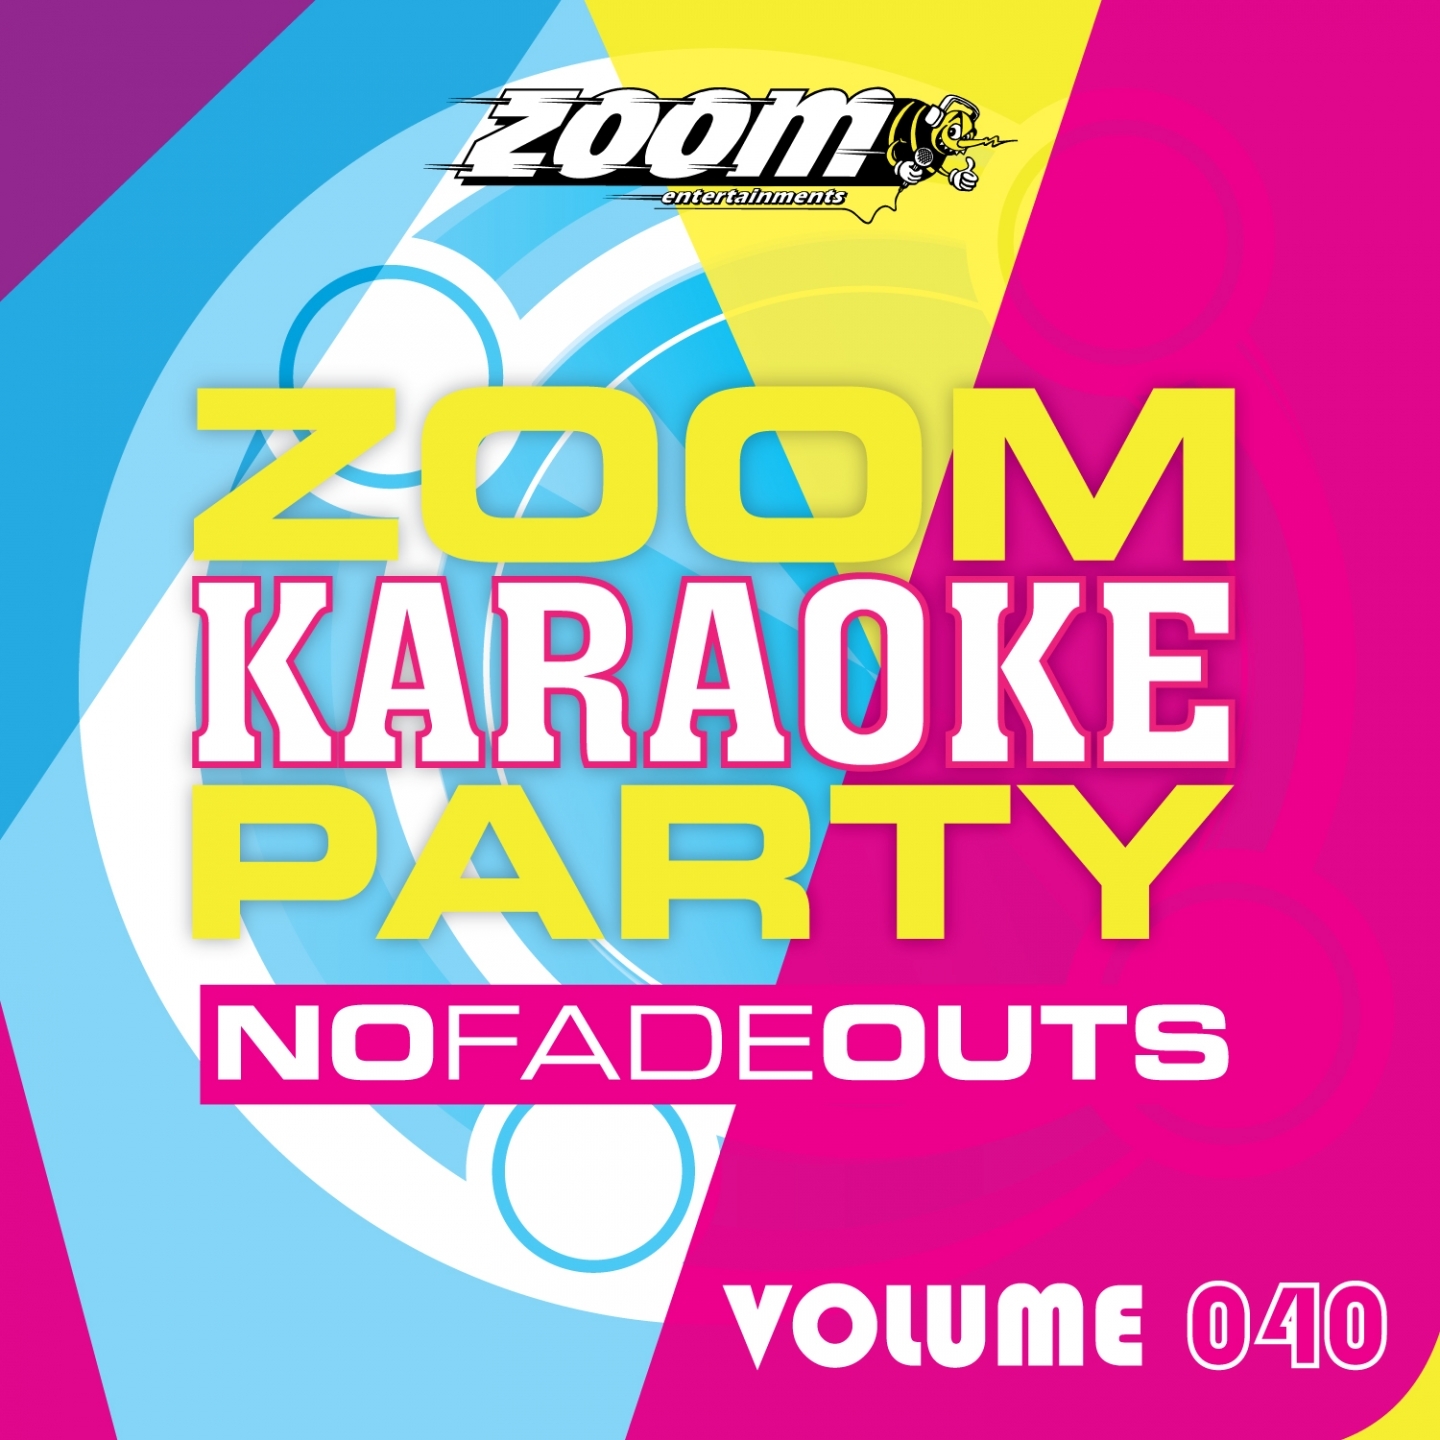 Wasted Time (Karaoke Version) [Originally Performed By The Eagles]